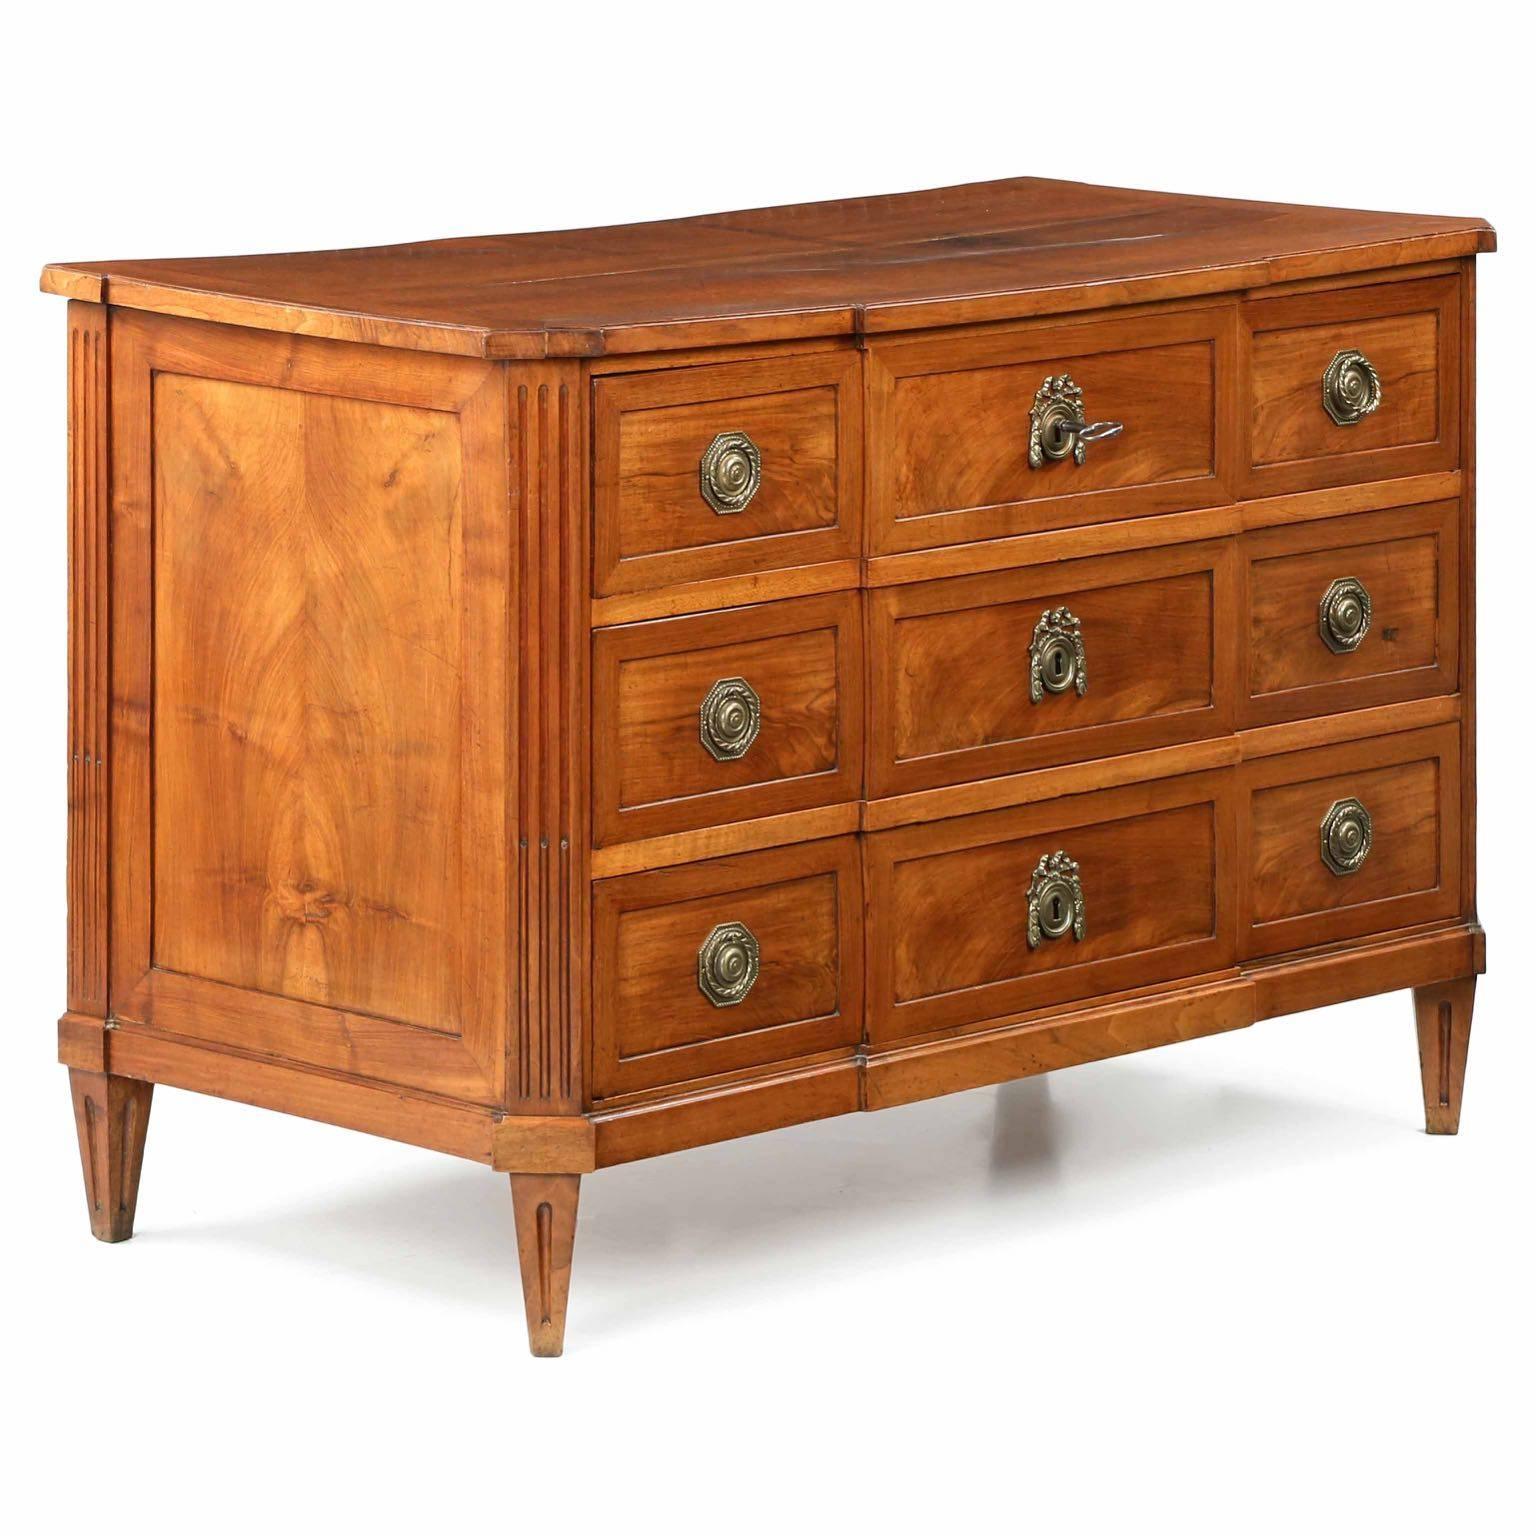 Neoclassical Revival Italian Neoclassical Walnut Commode Antique Chest of Drawers, 19th Century